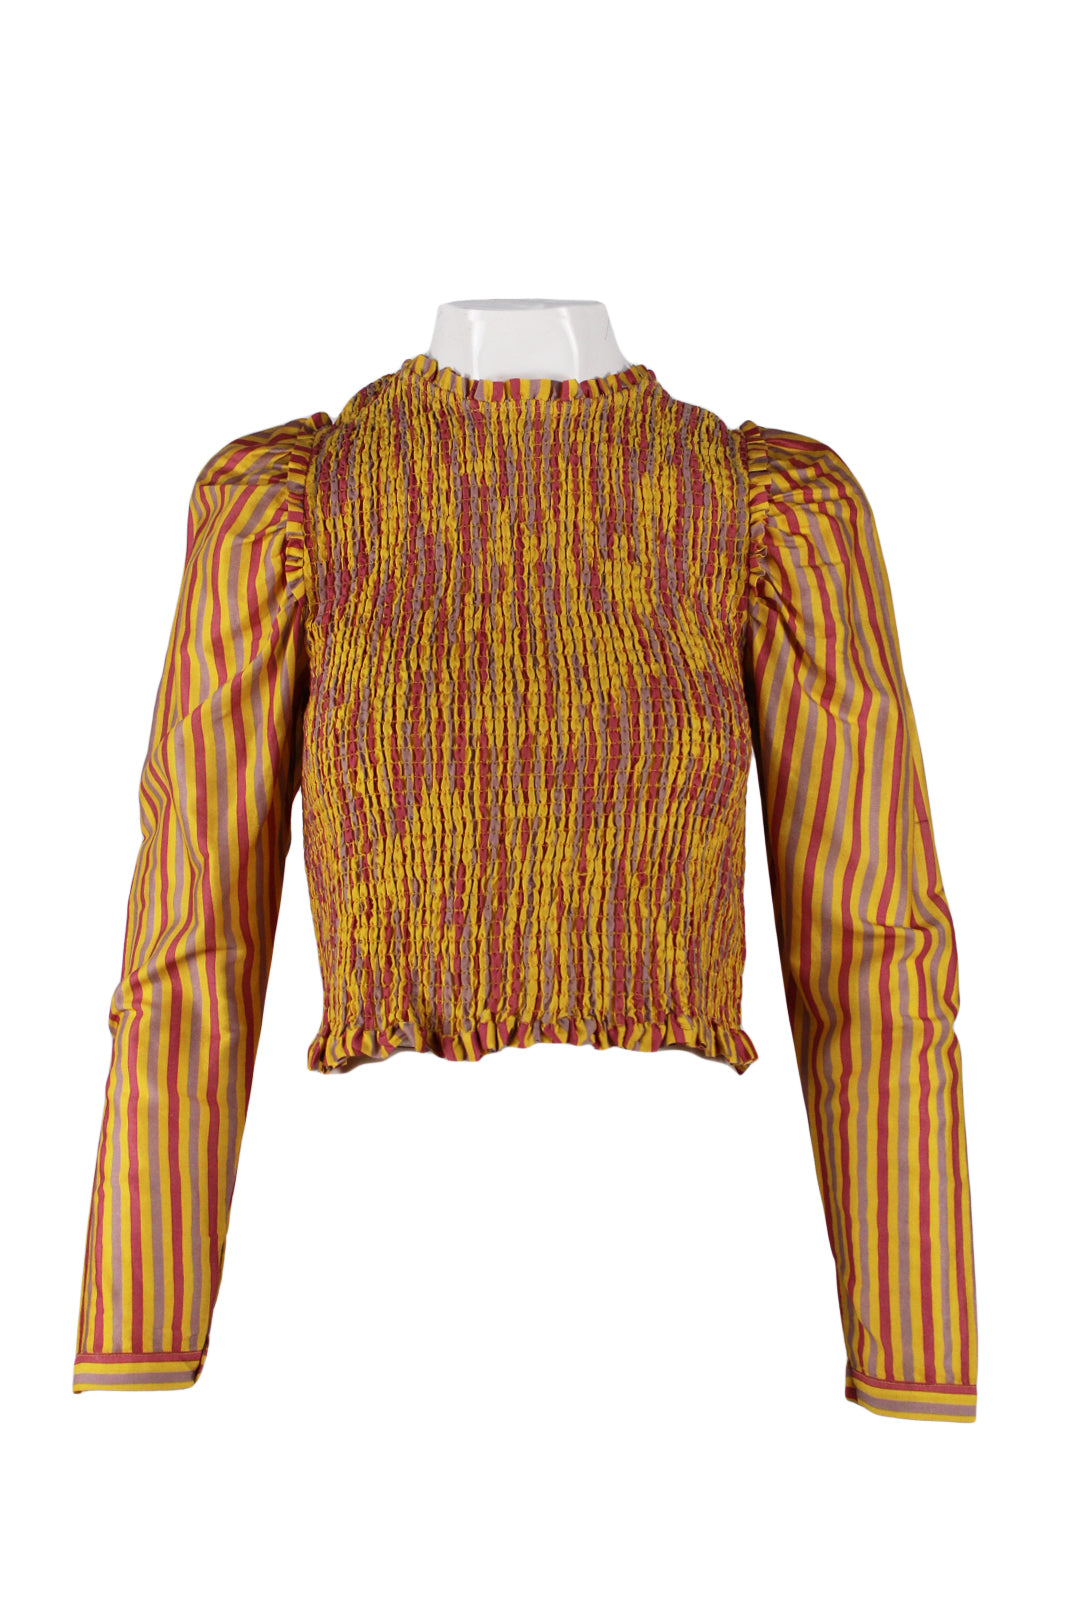 description: alix of bohemia yellow and purple stripped shirred long sleeve top. features ruffle at neckline, shirred bodice, zipper closure at center back and slight balloon sleeves. 